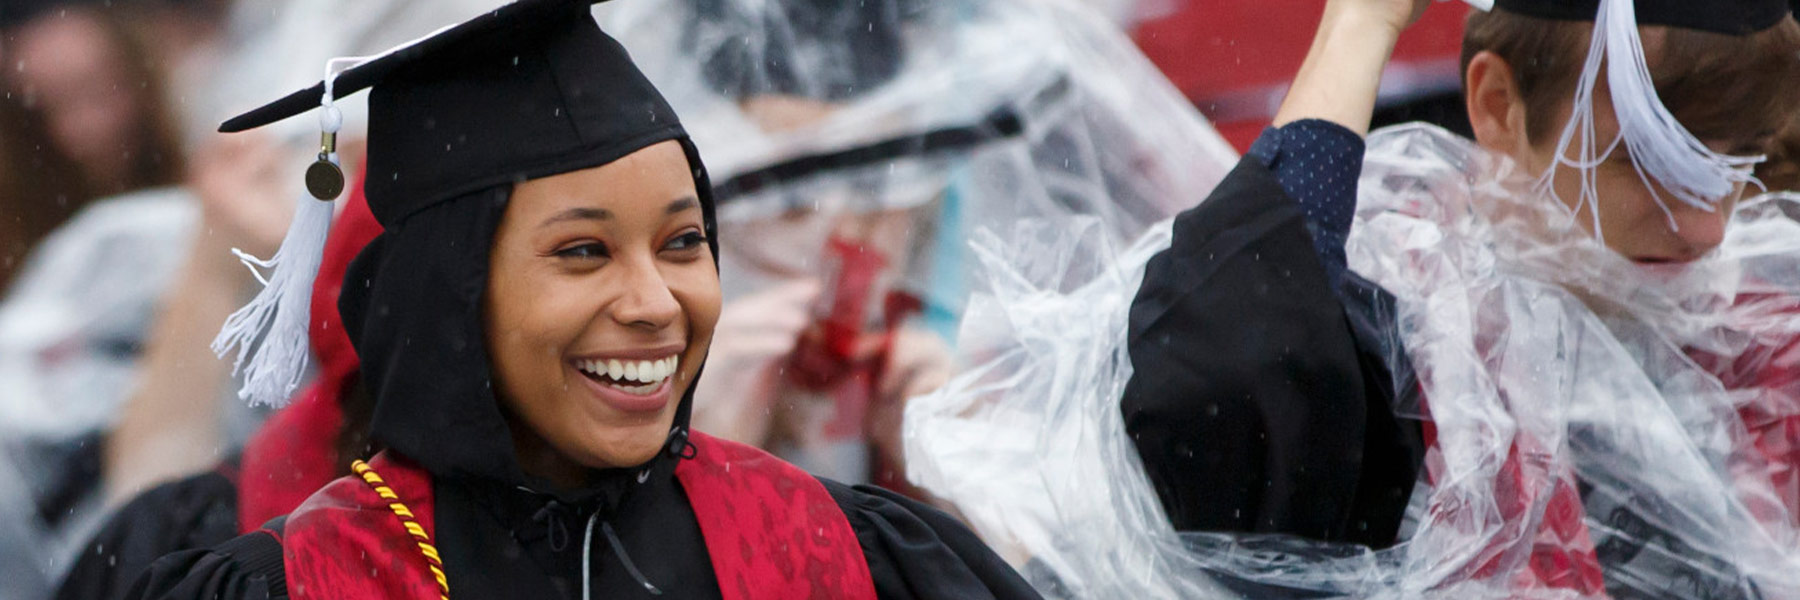 A young woman in graduation attire and modestly covered hair smiles in the middle of a light rain. In the background, other soon to be graduates struggle to put on rain ponchos.